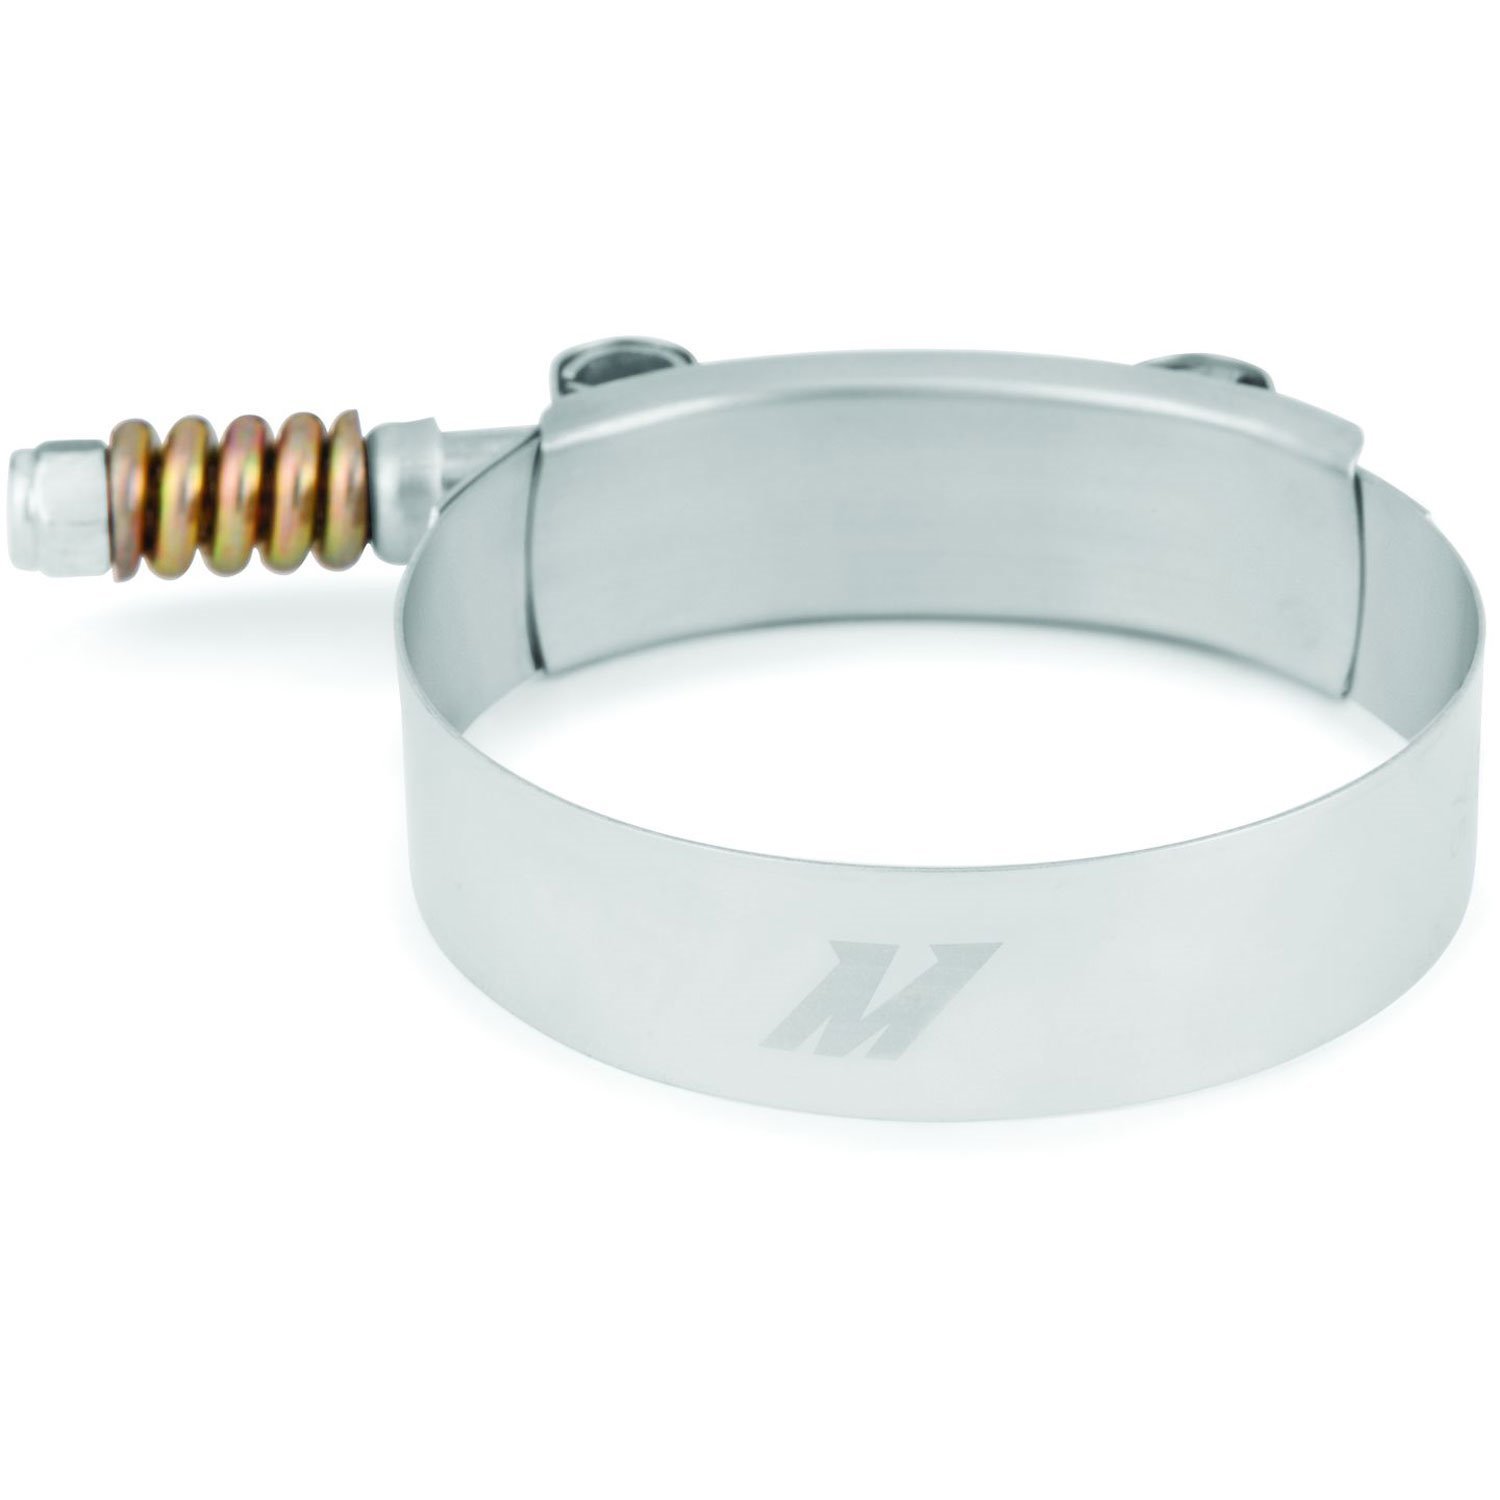 2.75" Constant Tension T-Bolt Hose Clamp 2.64" (67mm) to 2.95" (75mm) Clamping Range